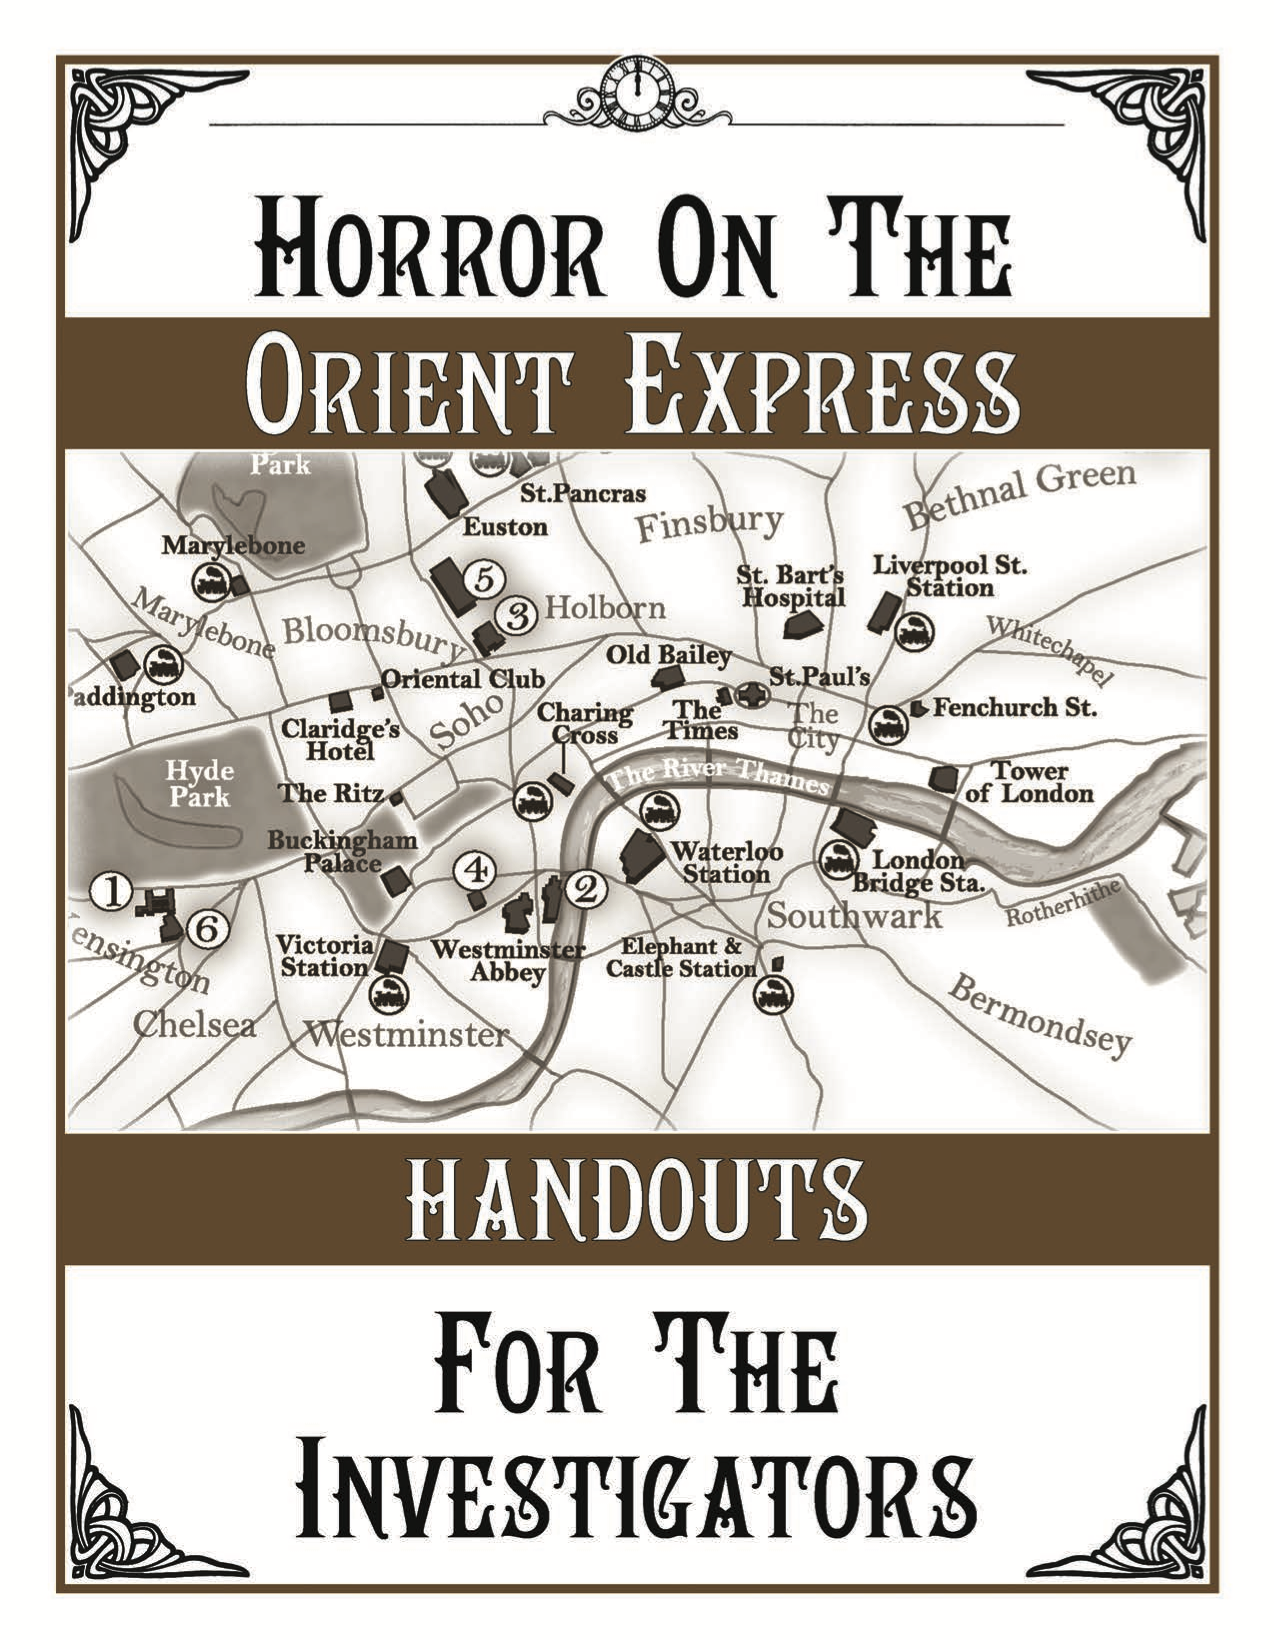 Horror on the Orient Express, Documenting my journey as a Keeper's  sidekick